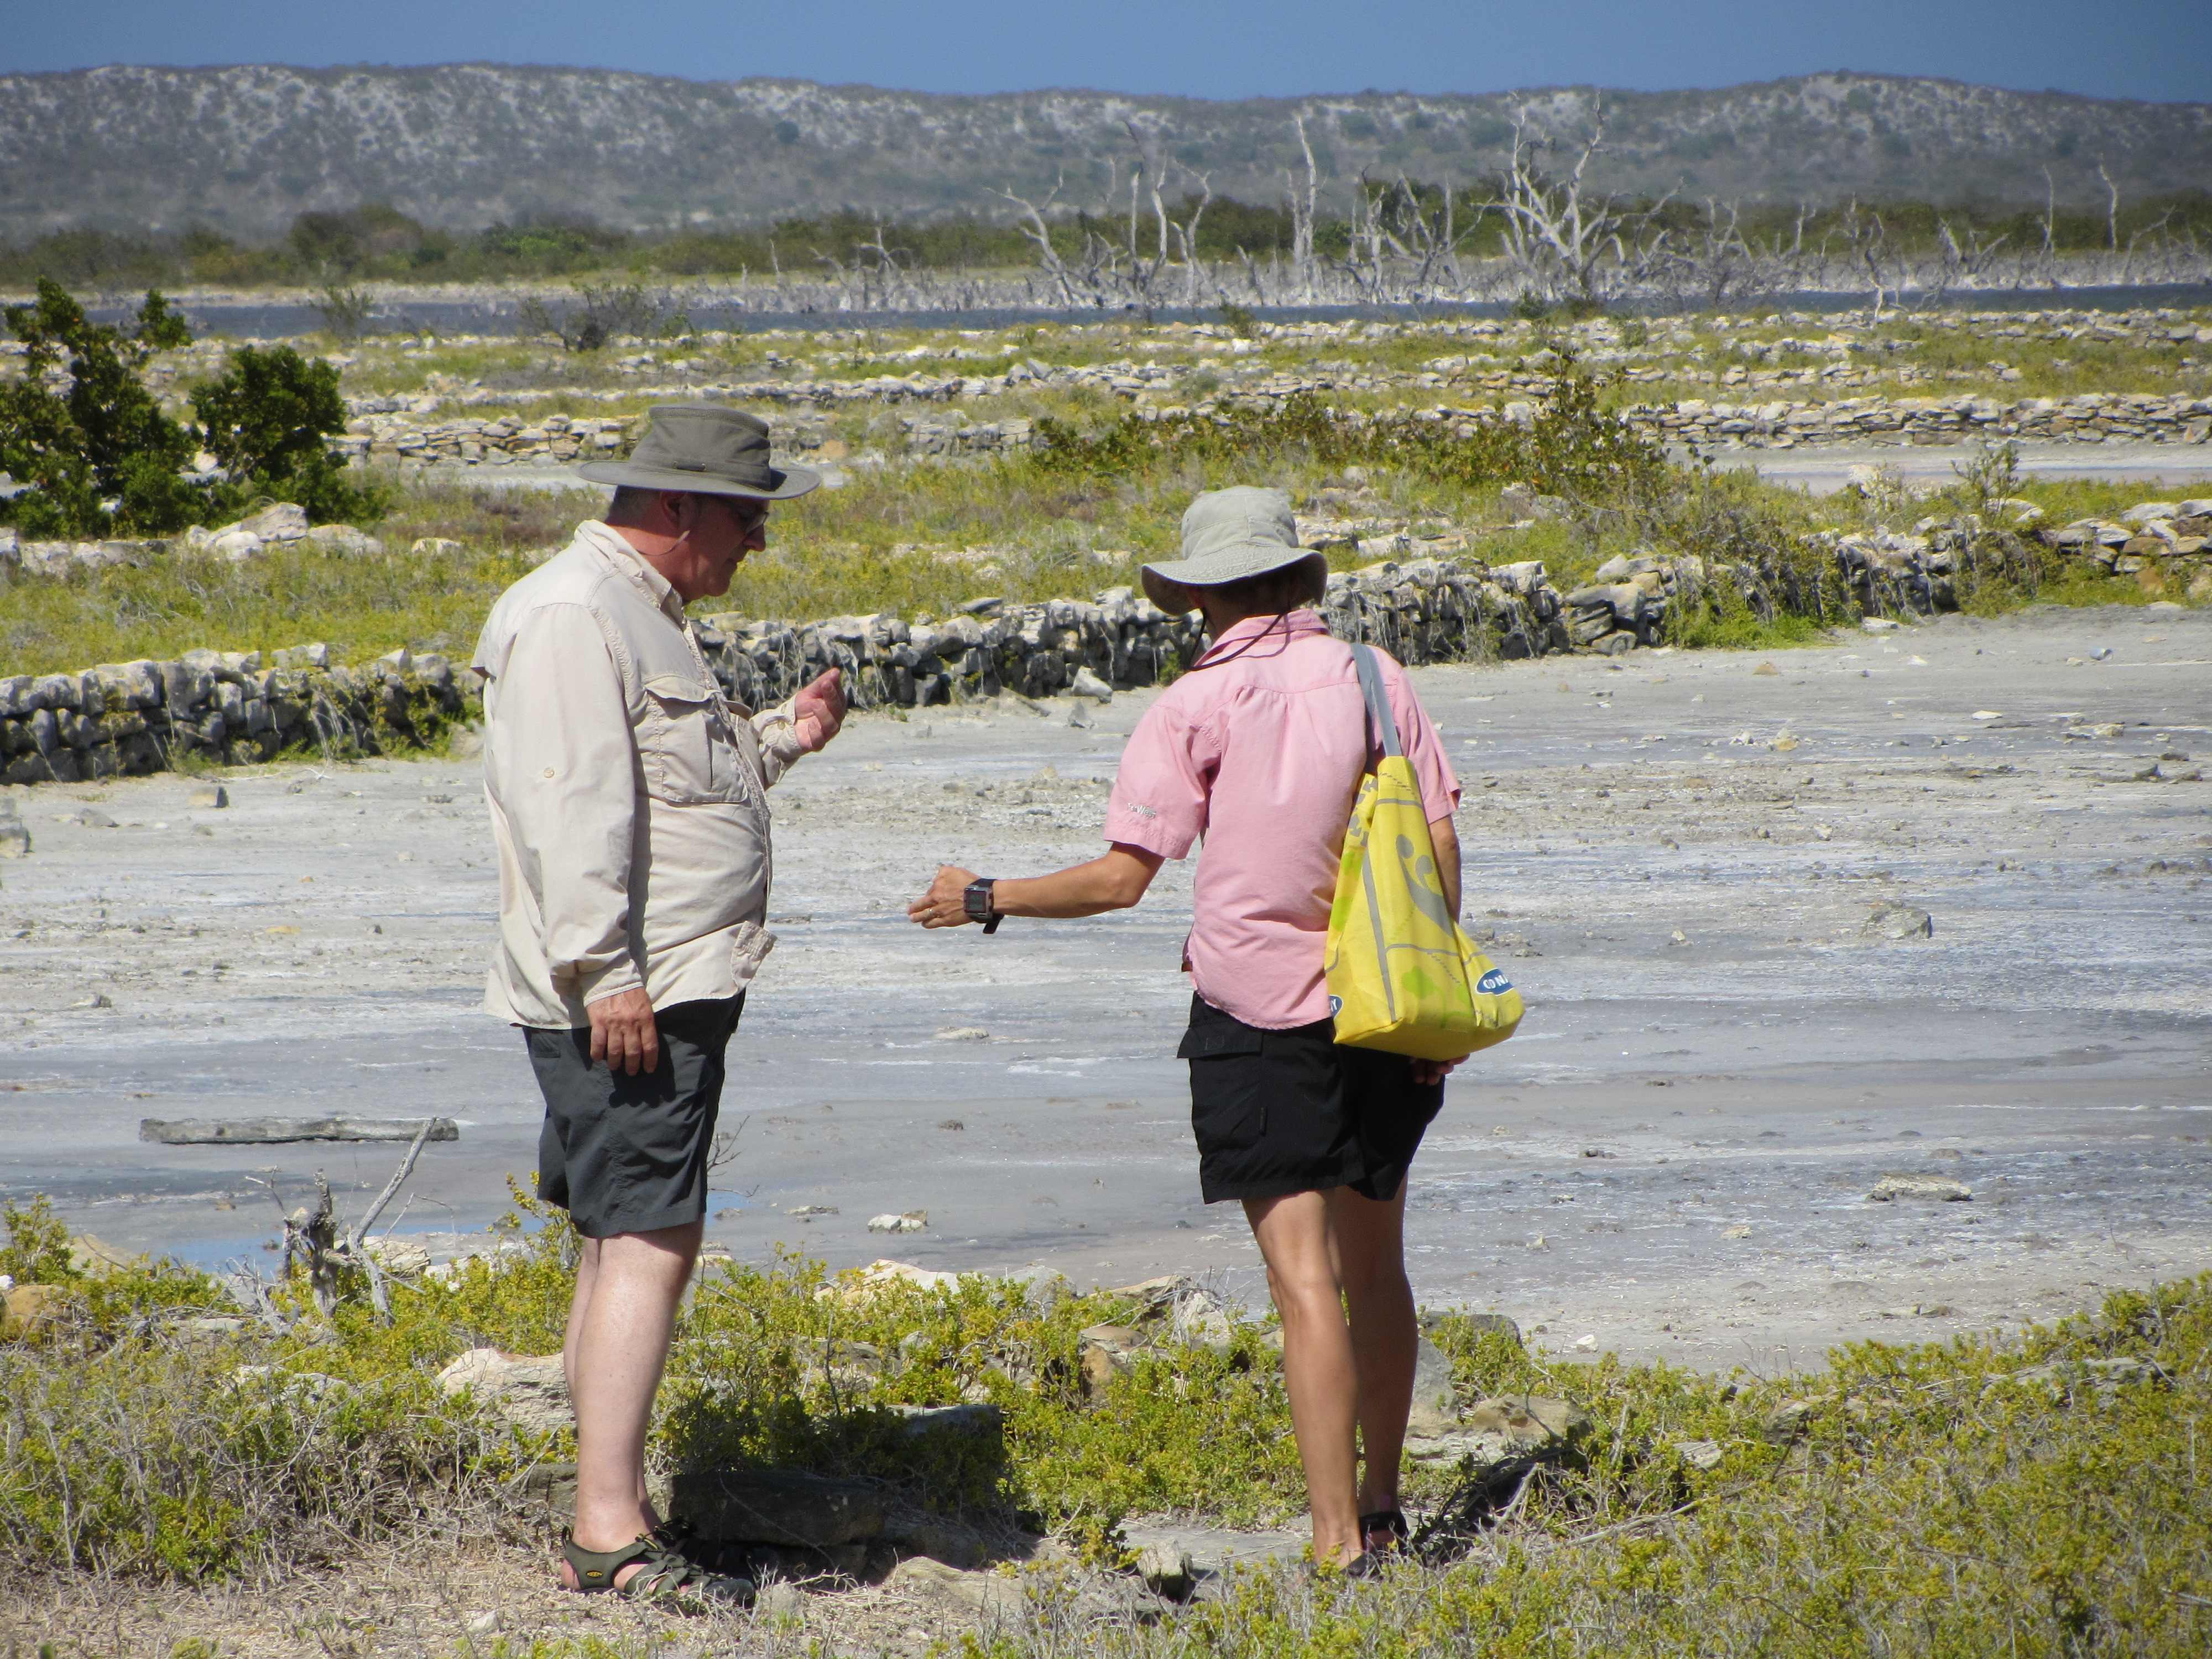 Tony and Jane collecting salt from the pond.